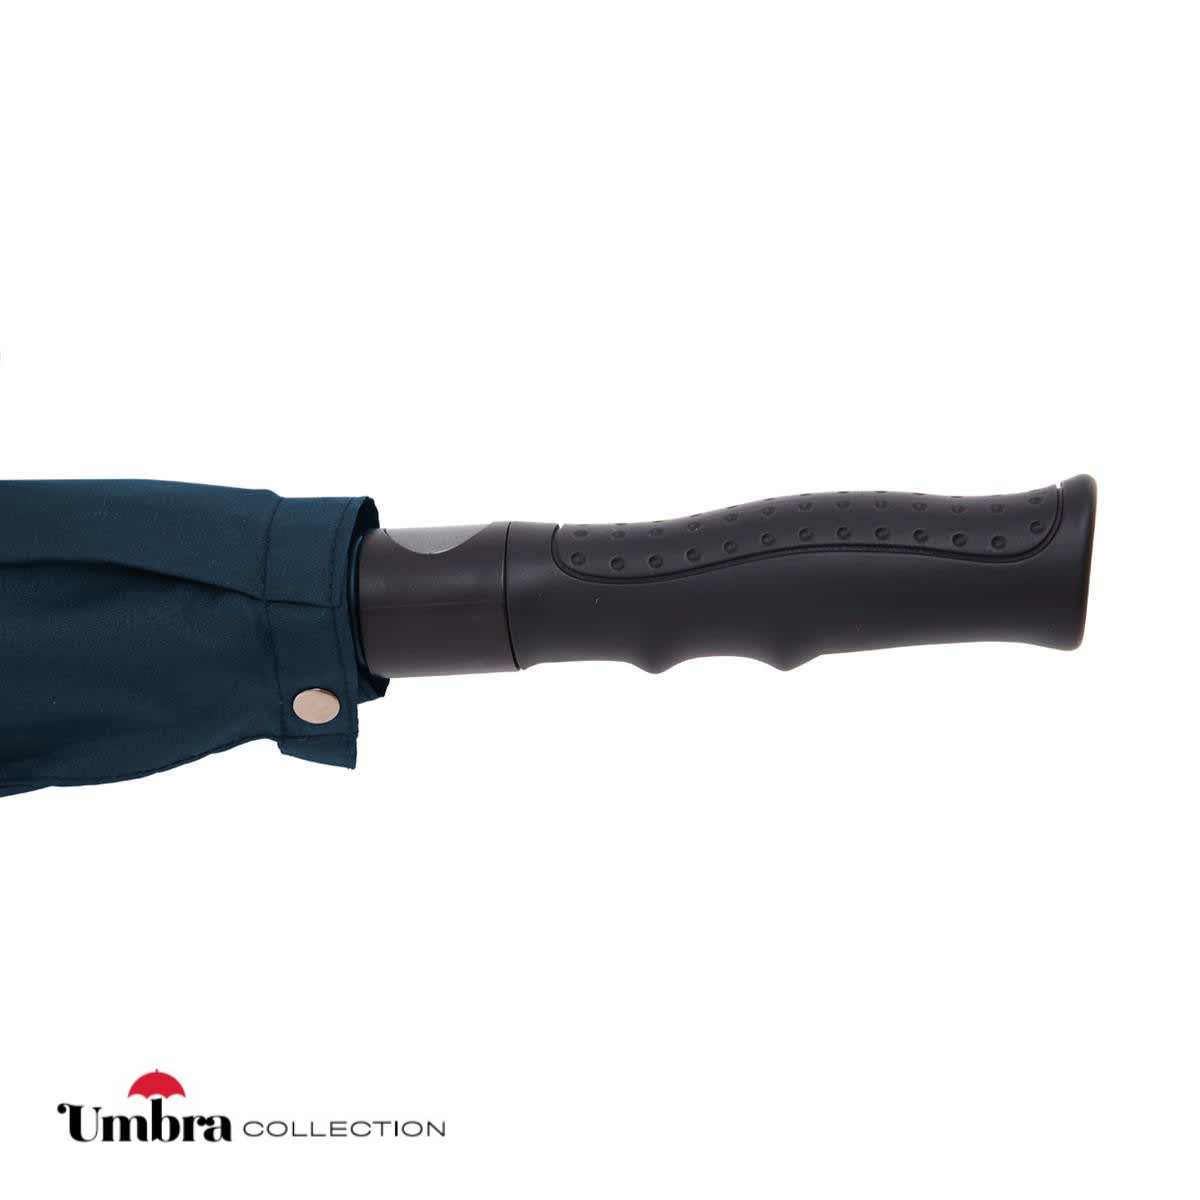 UMBRA_-ultimate-heavy-duty-umbrella-superior-fibreglass-ultimate_-frame-double-layer-wind-vent-system-navy-6